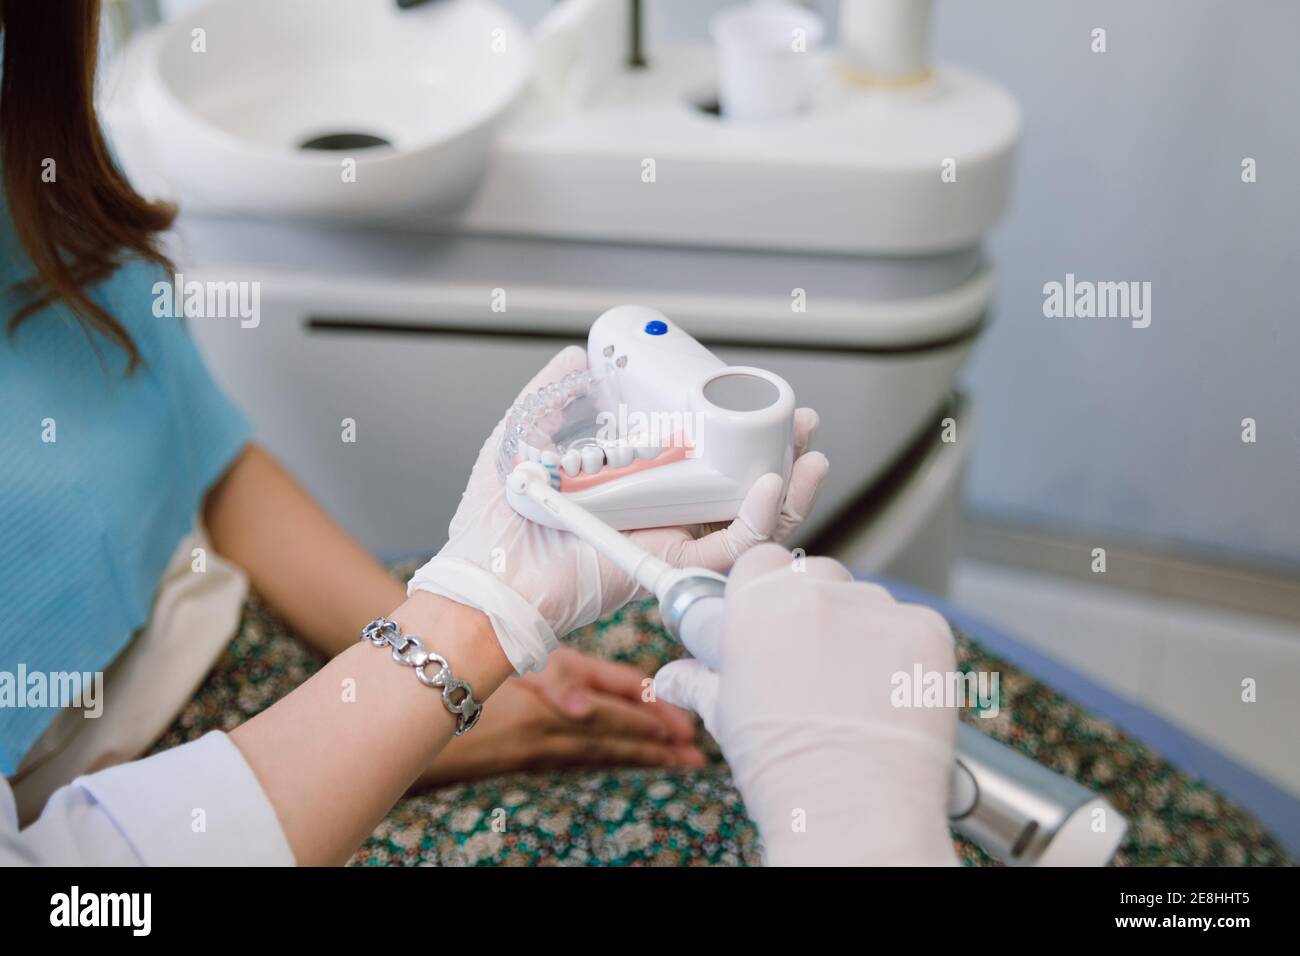 Crop unrecognizable female dental hygienist with prosthetics and electric toothbrush demonstrating patient how to brush teeth correctly during appoint Stock Photo